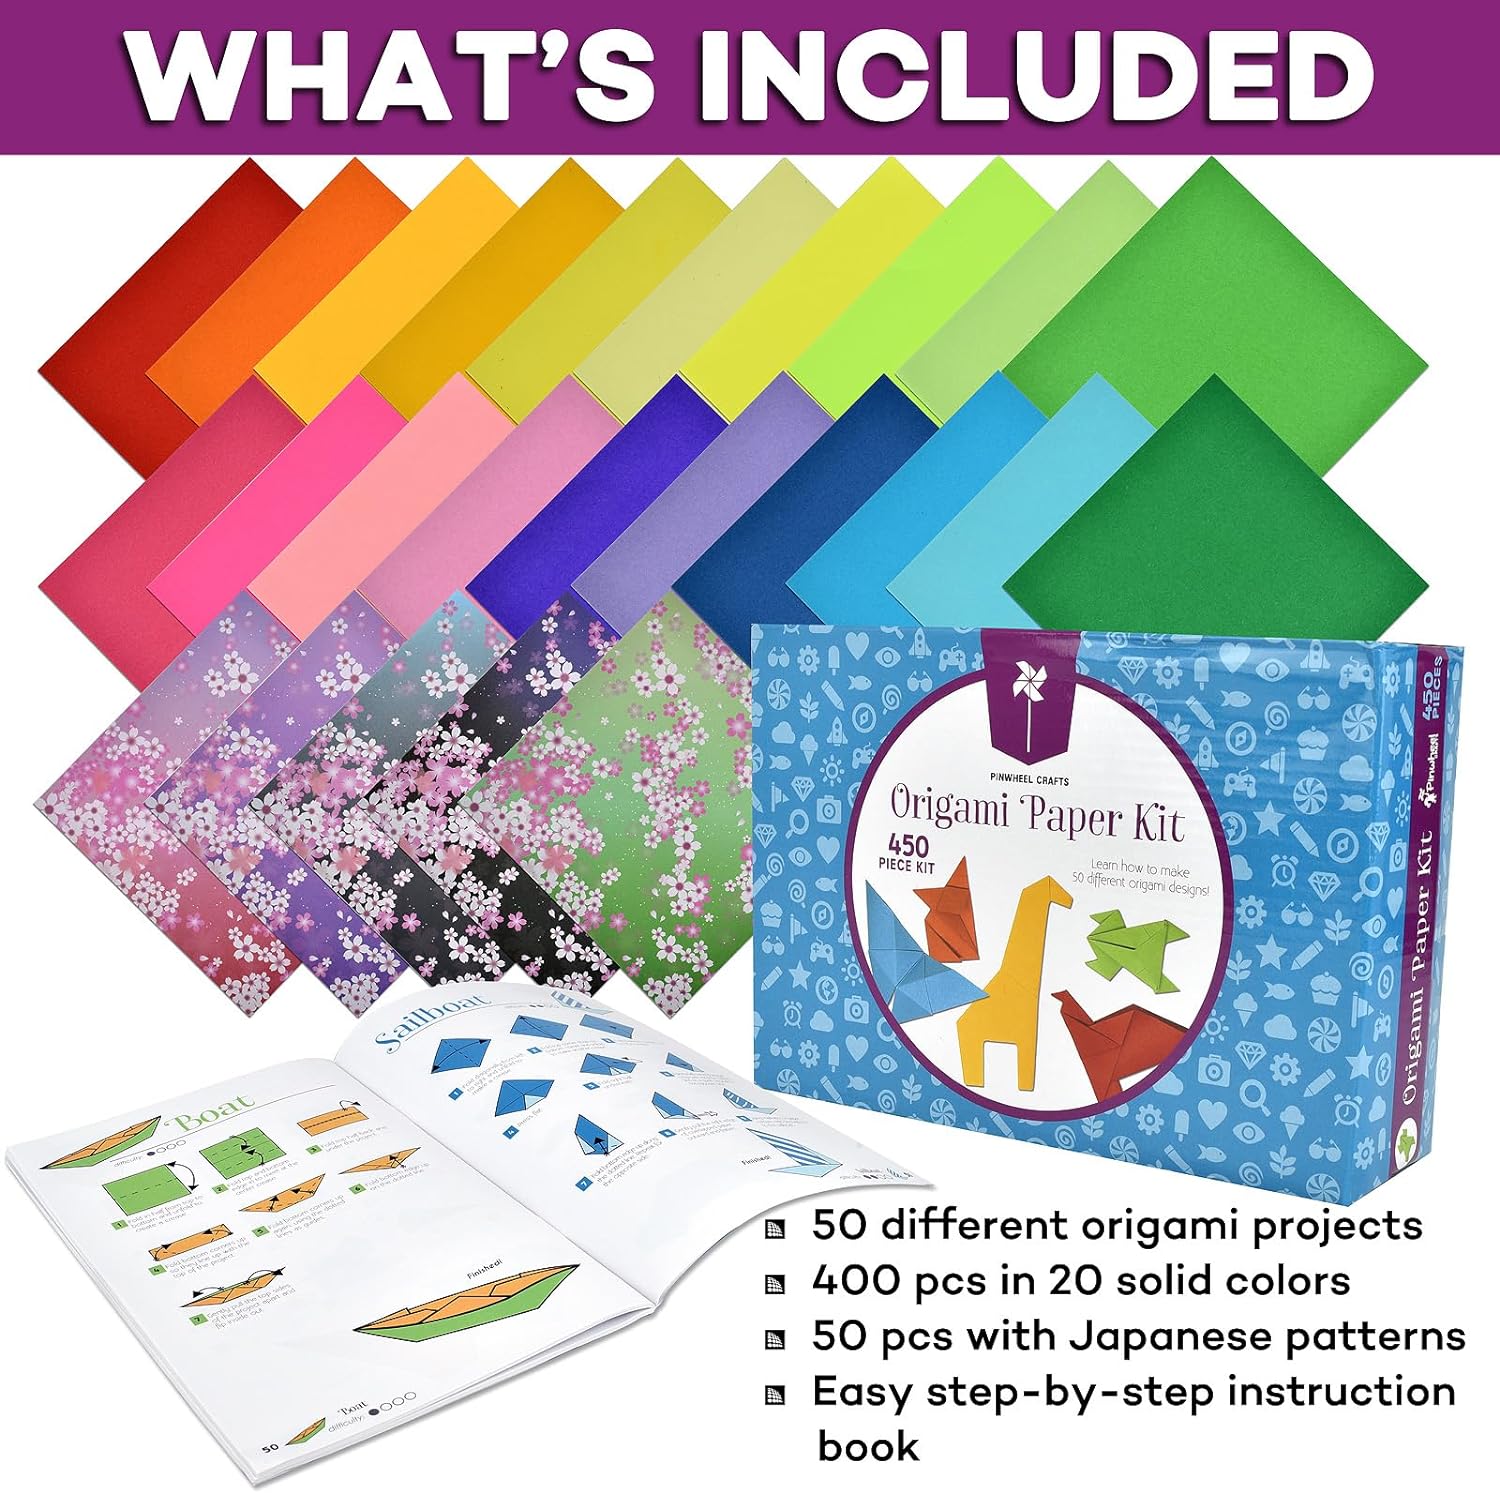 Pinwheel Crafts Origami Paper Kit - Includes 50 Projects for Kids